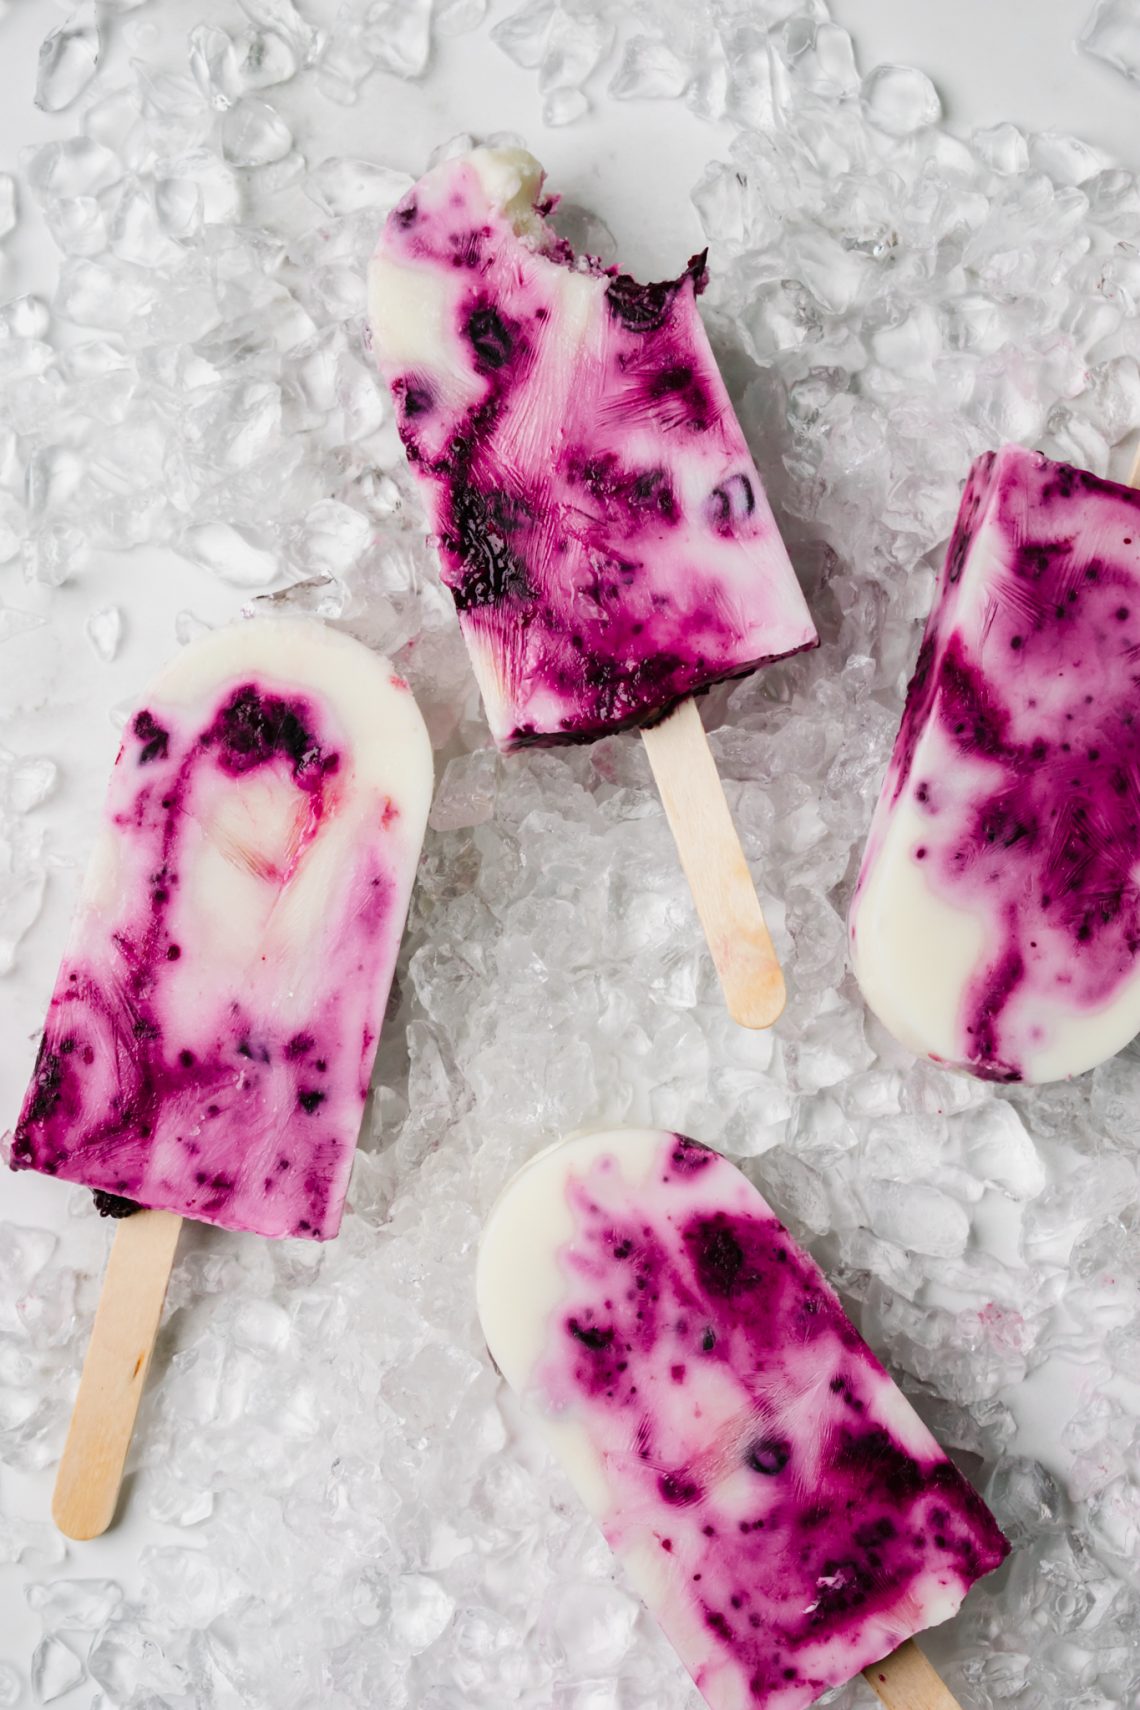 Blueberry and Chia Yoghurt Popsicles